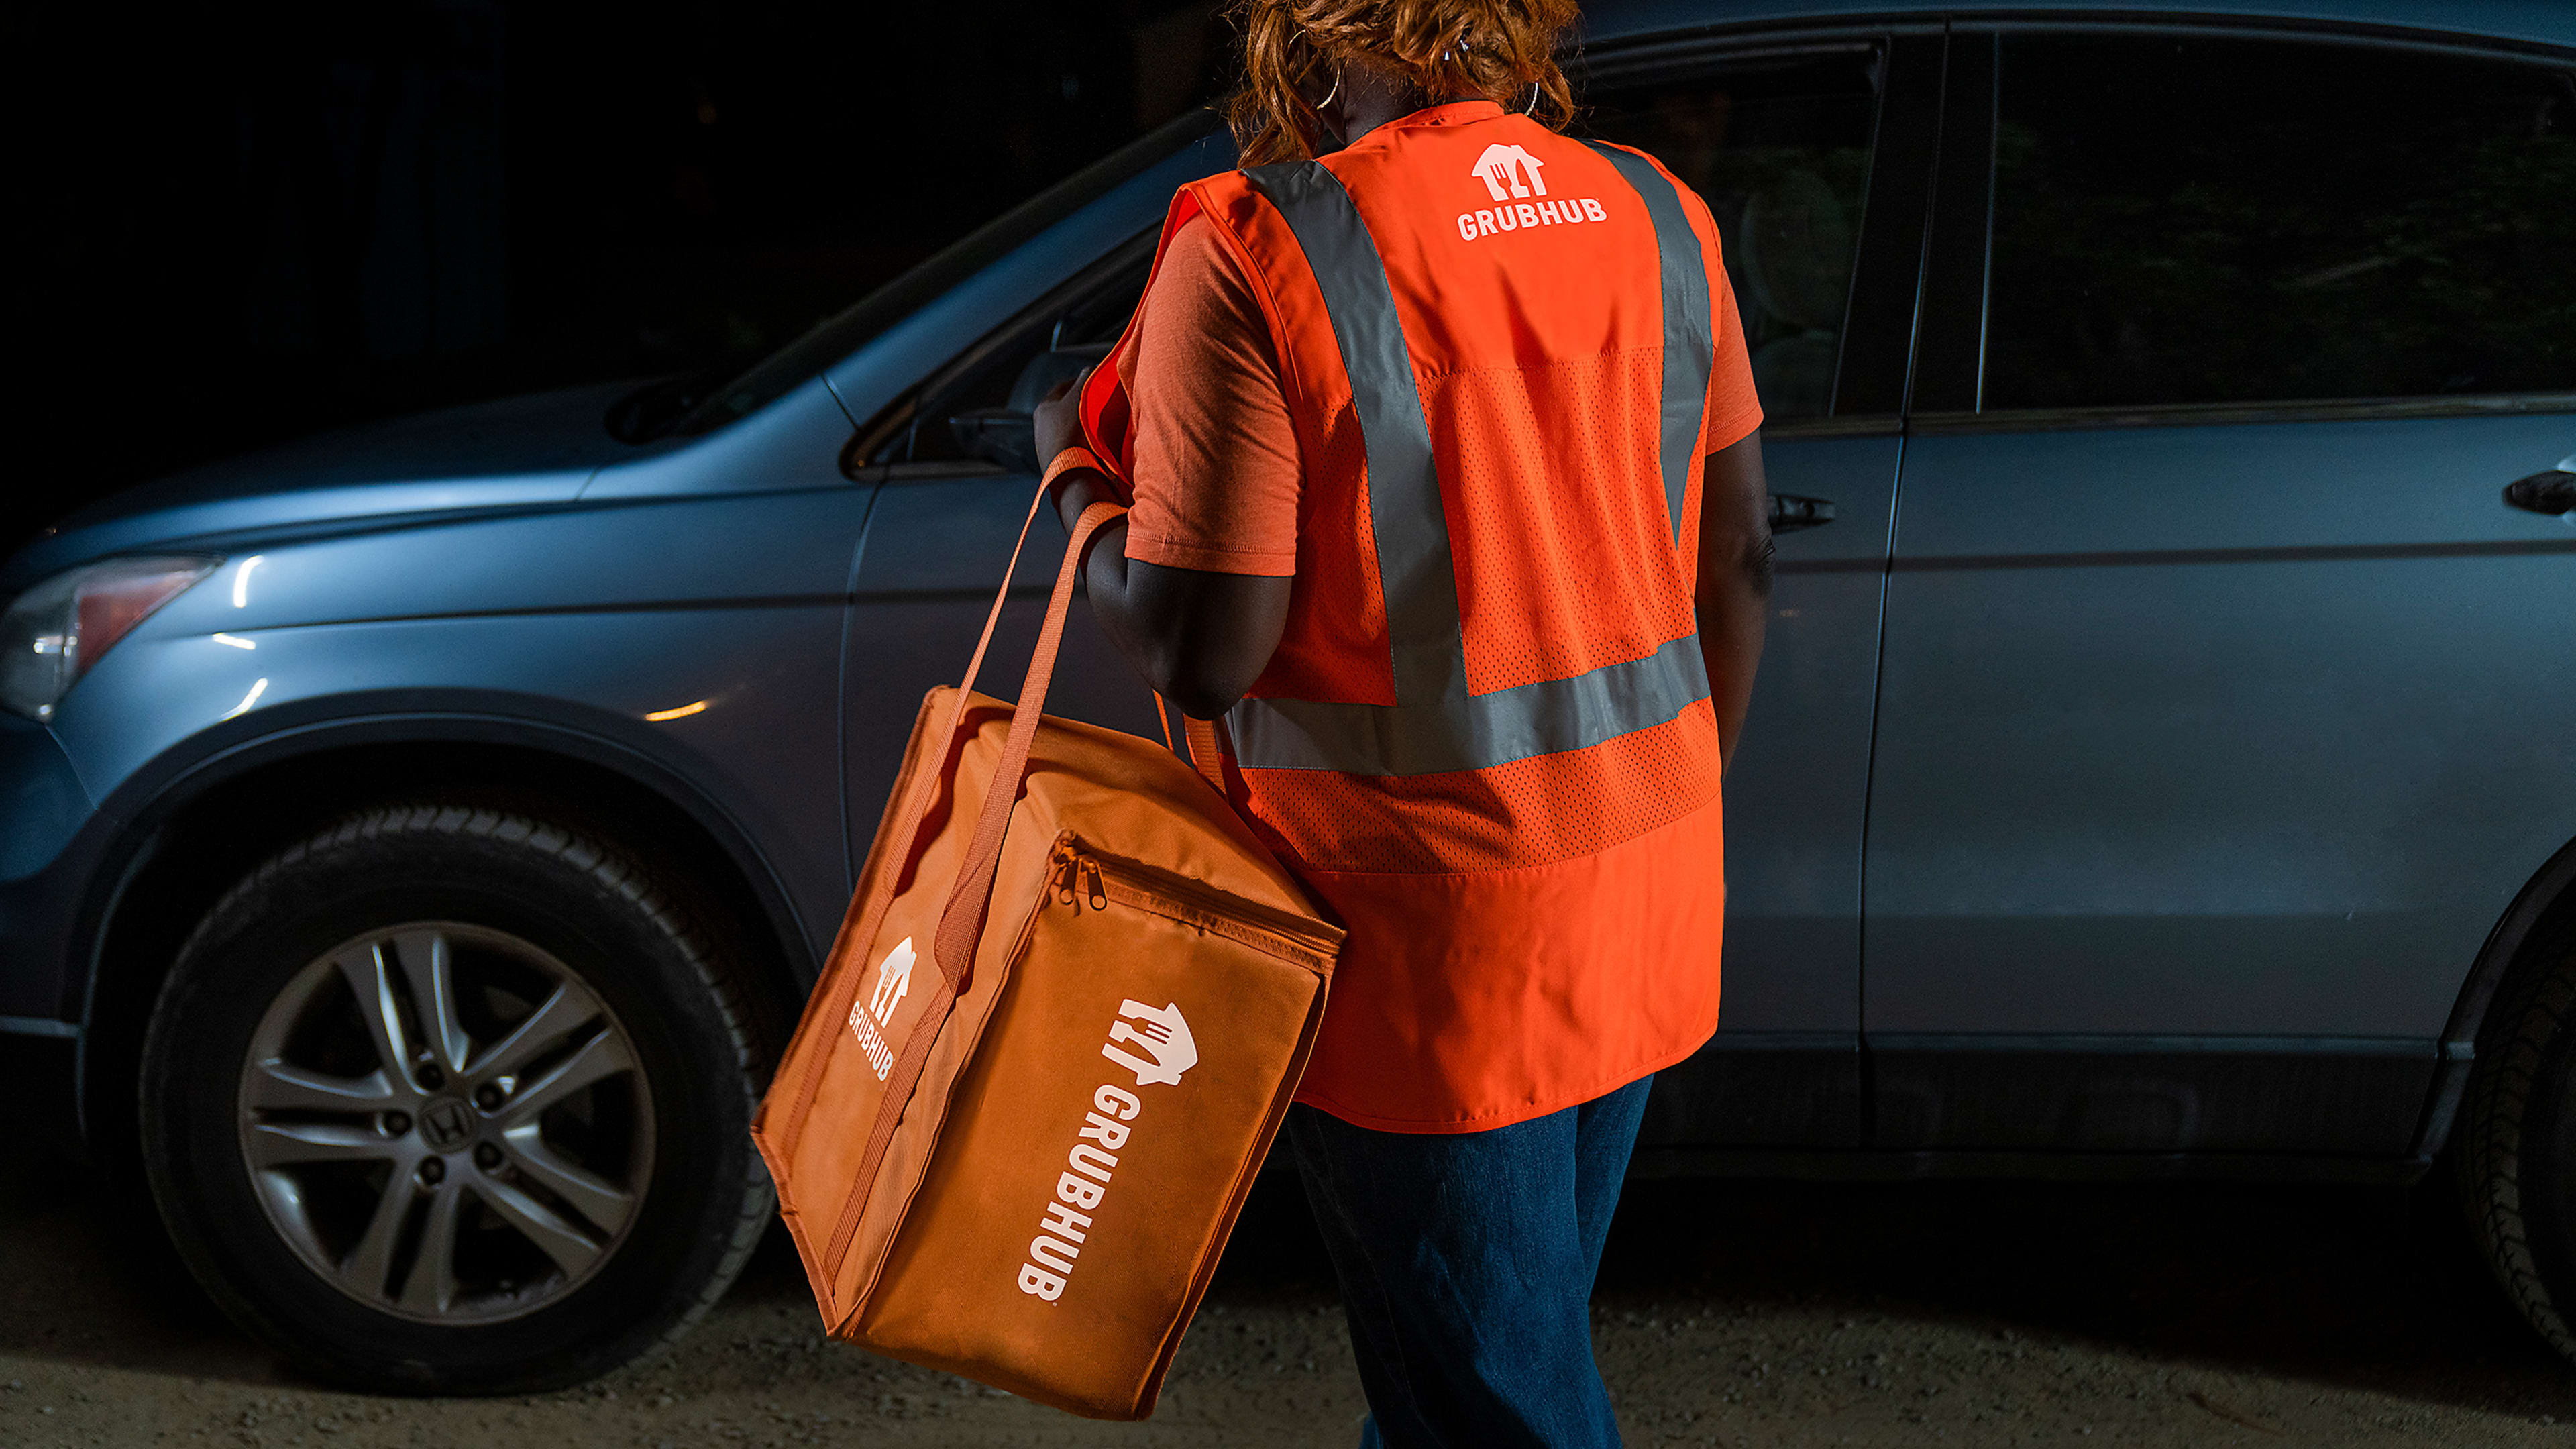 Grubhub just rolled out new emergency safety features for gig workers with RapidSOS